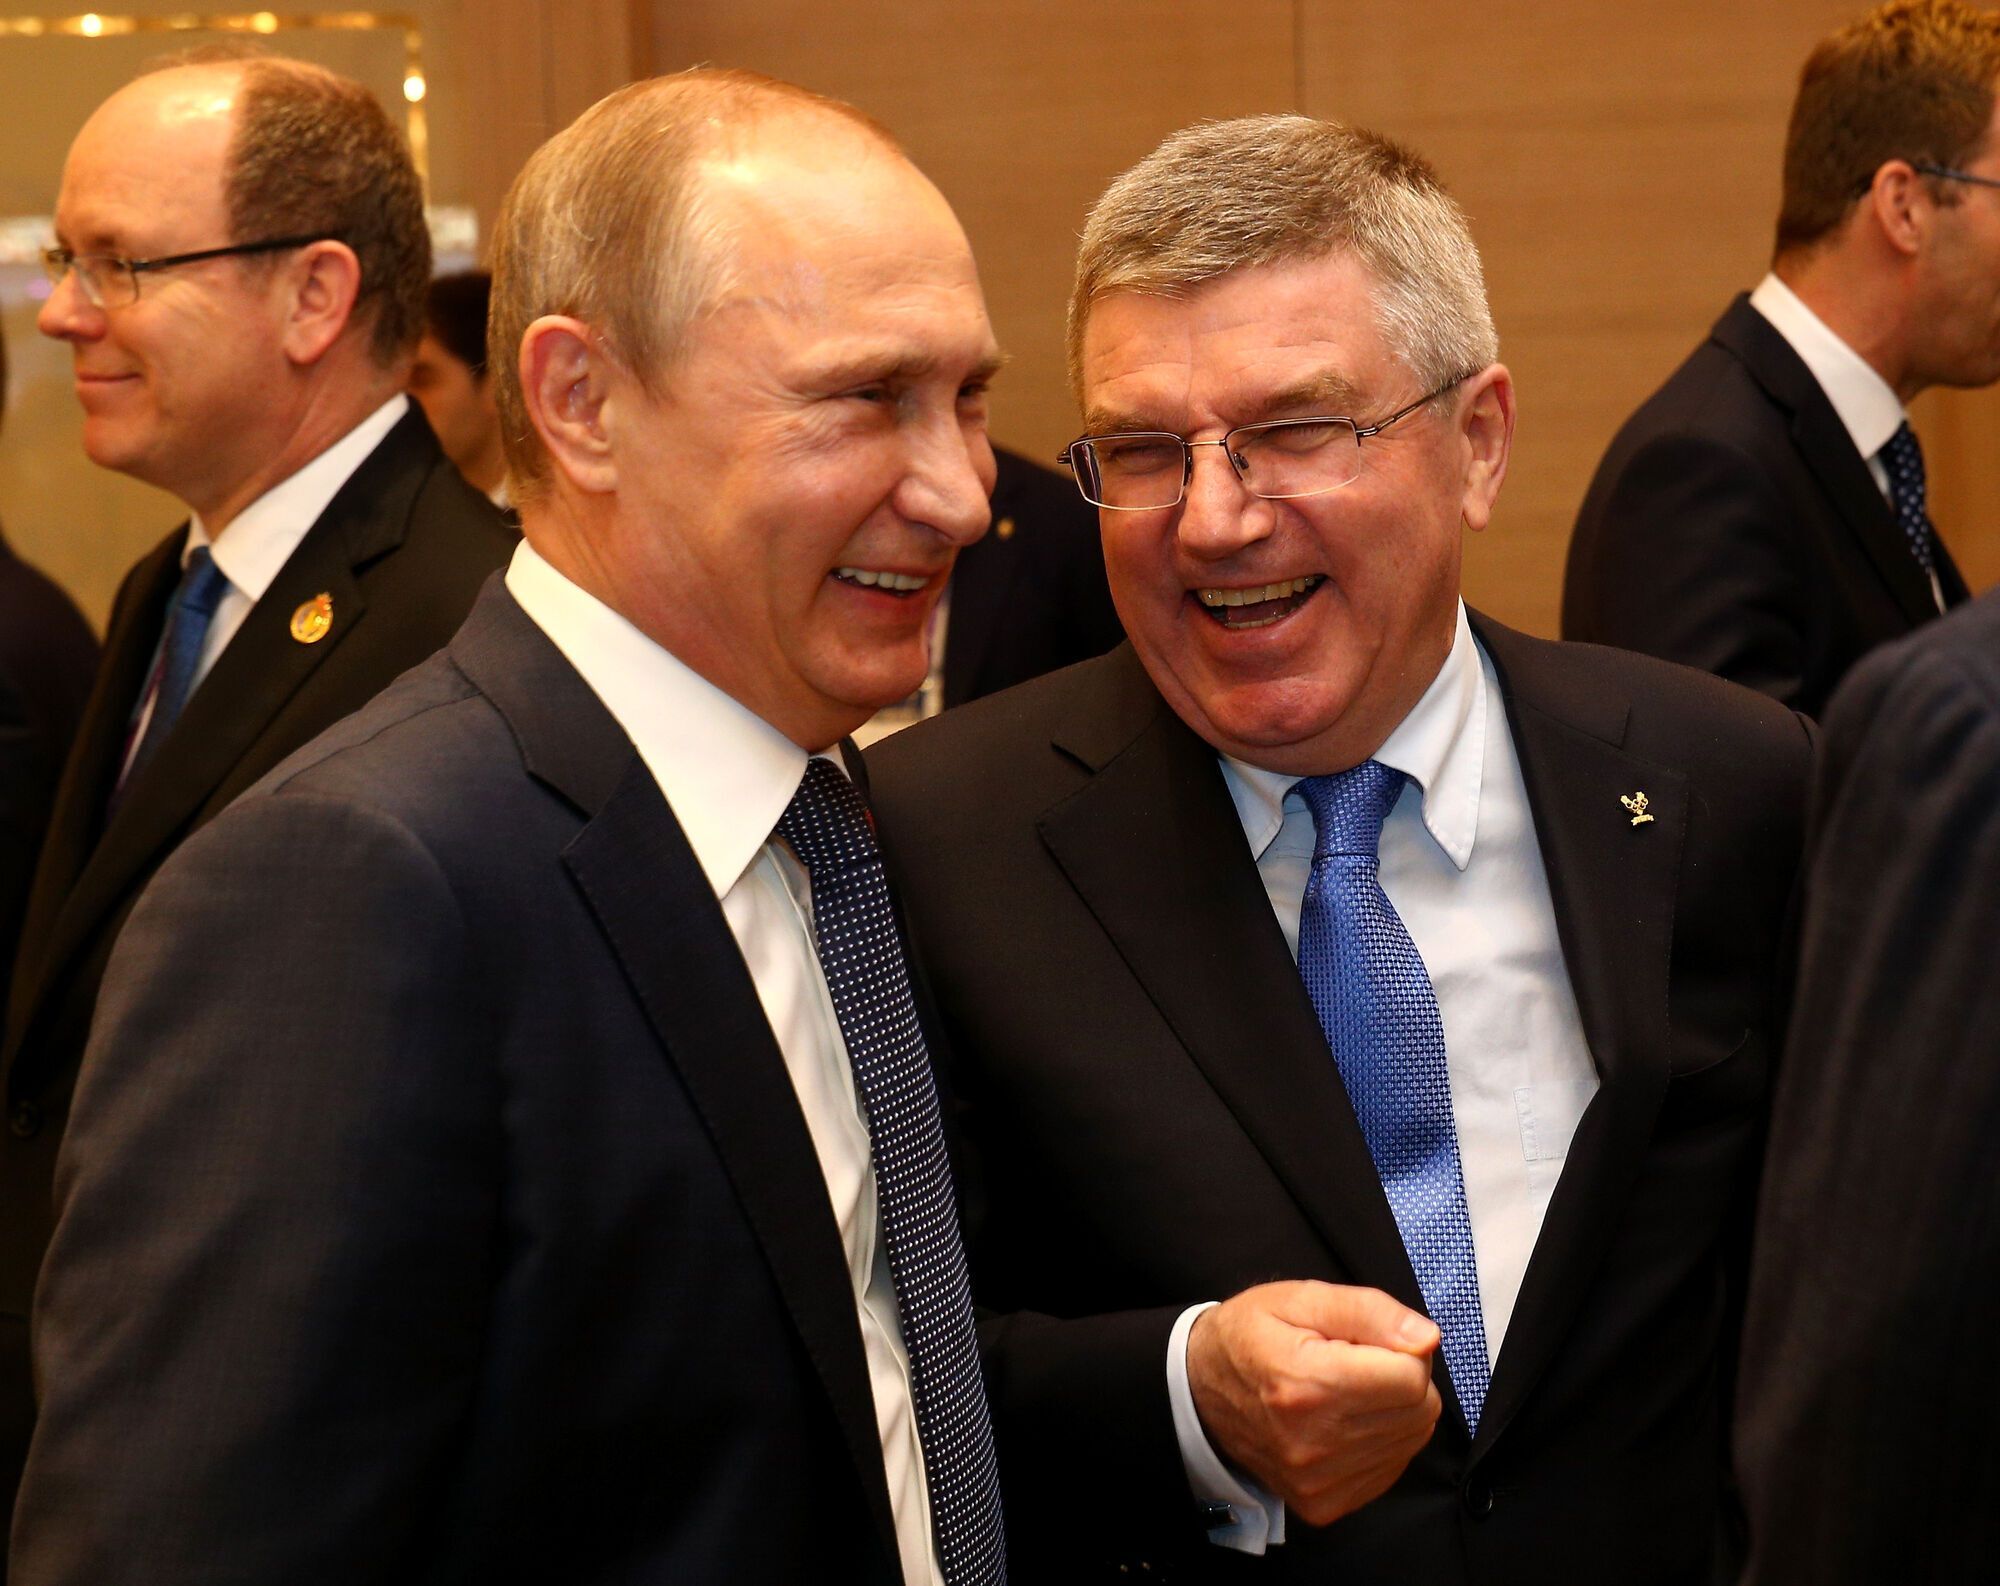 ''Immediately'': IOC President threatens Russians with disqualification from the 2024 Olympics